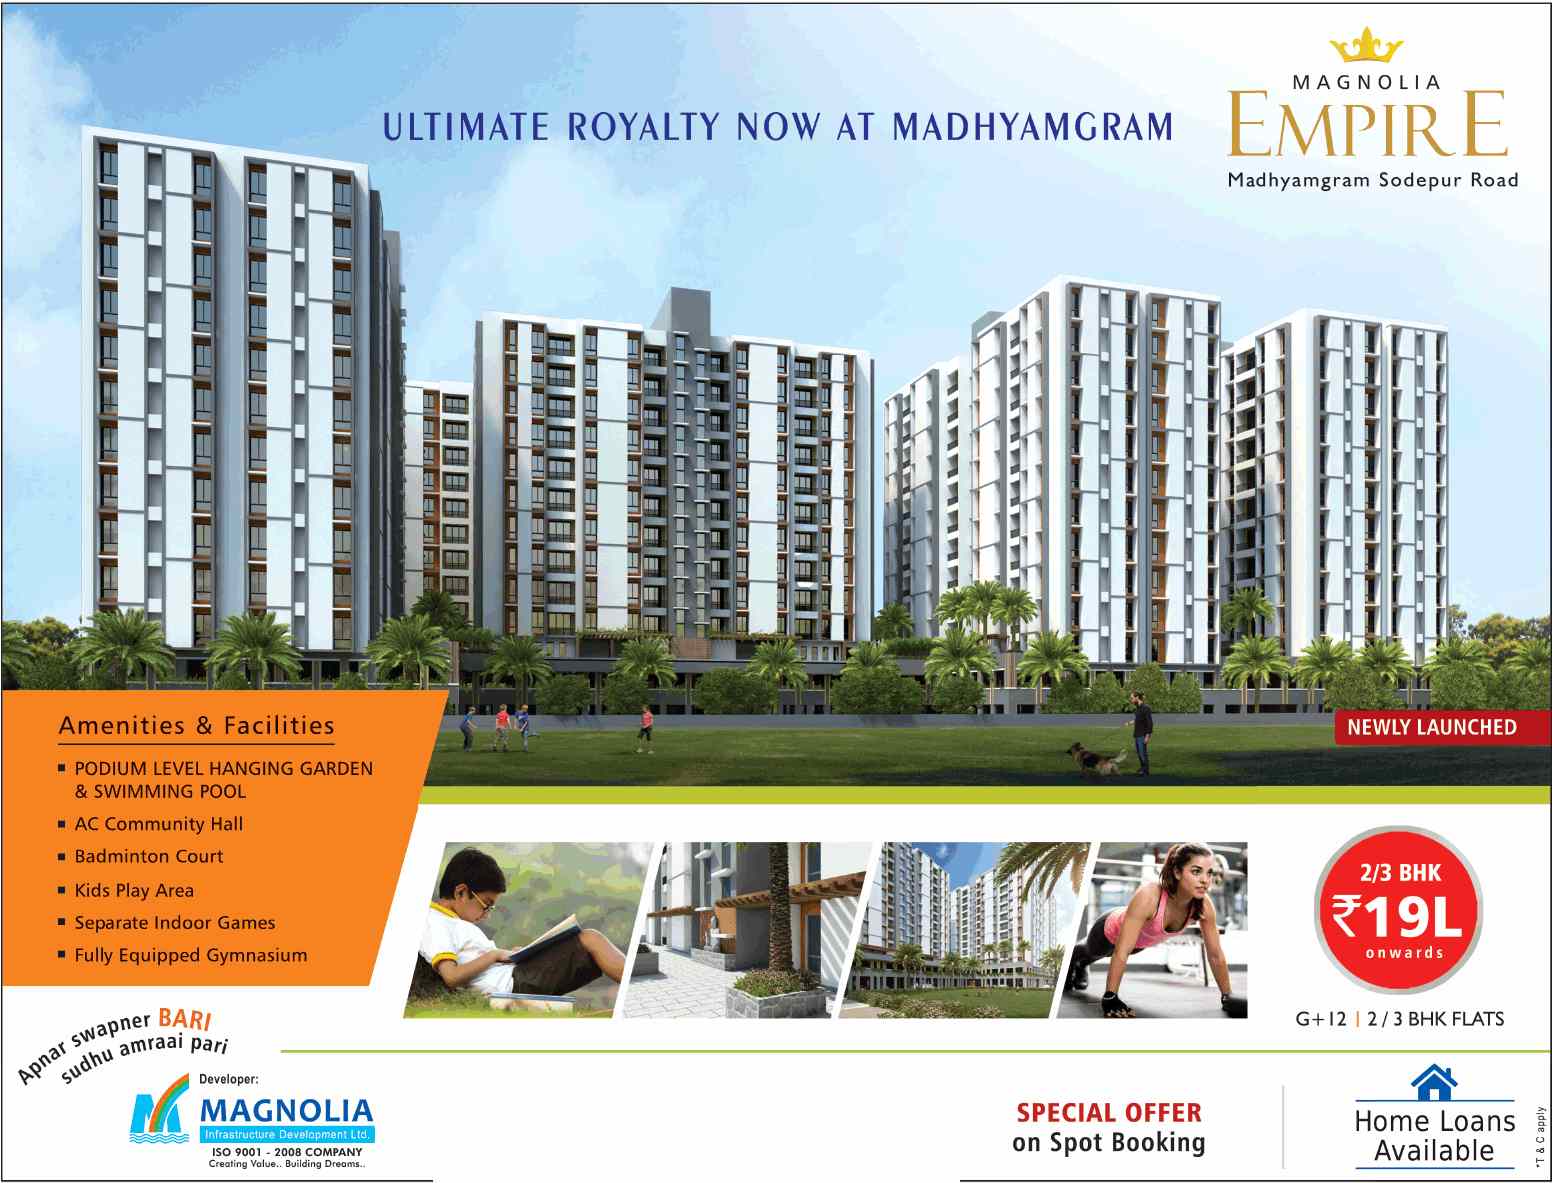 Experience ultimate royalty by residing at Magnolia Empire in Kolkata Update